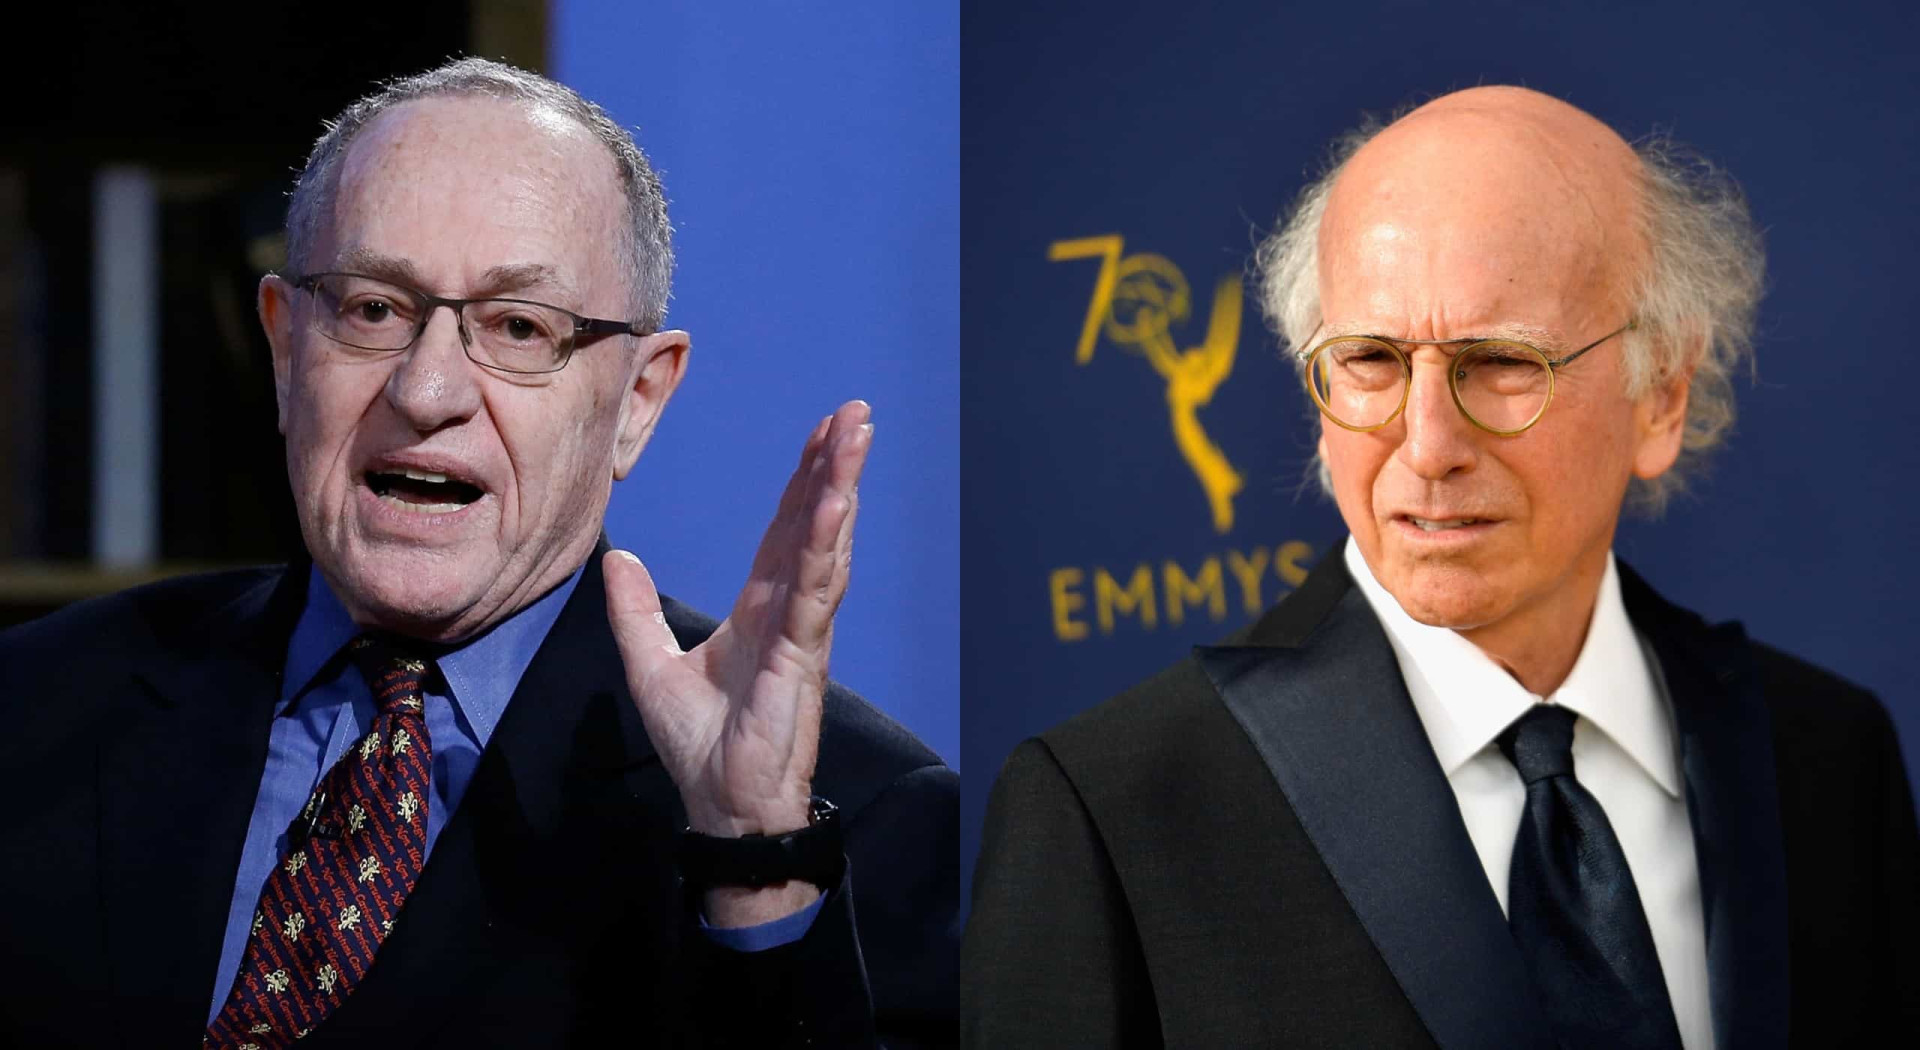 <p>The affluent creator of 'Seinfeld' and the equally wealthy prominent lawyer both frequently visit the upscale vacation spot of Martha's Vineyard. In the past, they were close friends. Regrettably, their friendship came to an end when Dershowitz began representing individuals from the Trump administration. When David, a liberal, unexpectedly encountered Dershowitz at a convenience store, he confronted him about his work with Trump and expressed his disgust towards his actions. Dershowitz apparently attempted to reconcile by suggesting that they could still communicate, stating "We can still talk, Larry," but David declined his gesture of peace.</p><p>You may also like:<a href="https://www.starsinsider.com/n/469365?utm_source=msn.com&utm_medium=display&utm_campaign=referral_description&utm_content=570915en-en"> Songs John Lennon and/or Paul McCartney gave away to other artists</a></p>